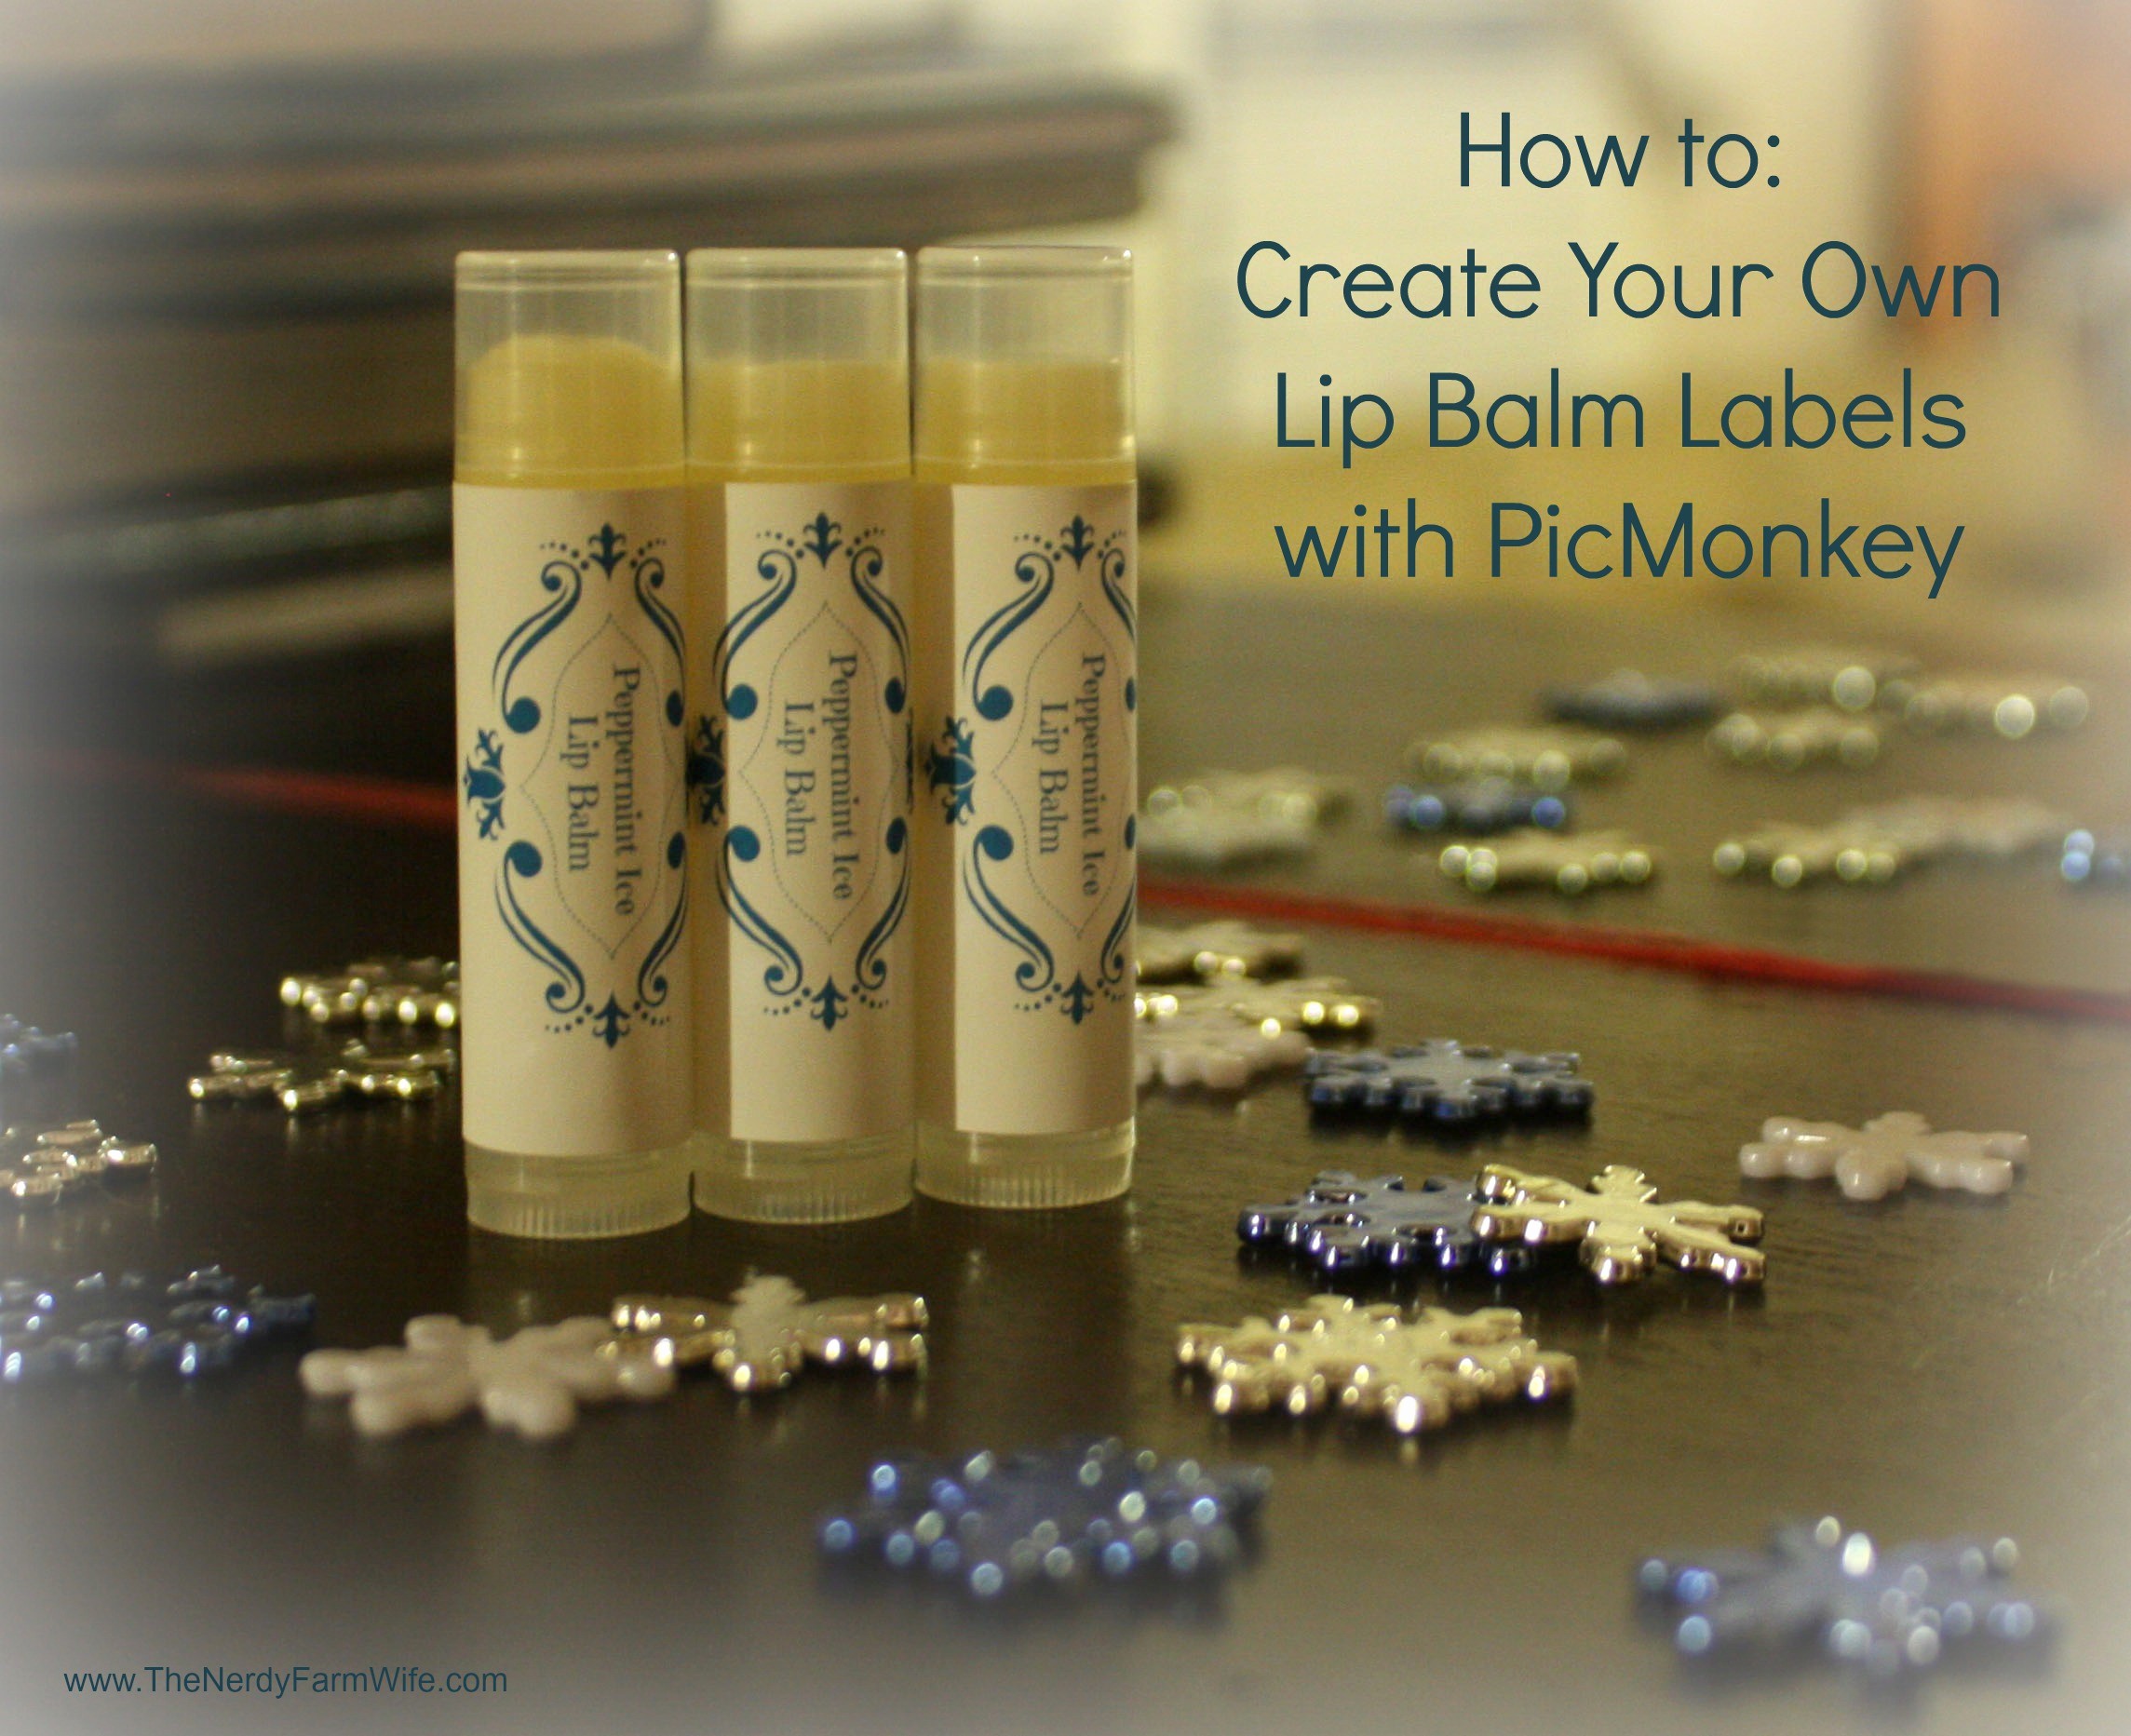 Make Your Own Address Book Fresh Create Your Own Lip Balm Labels Using Picmonkey – the